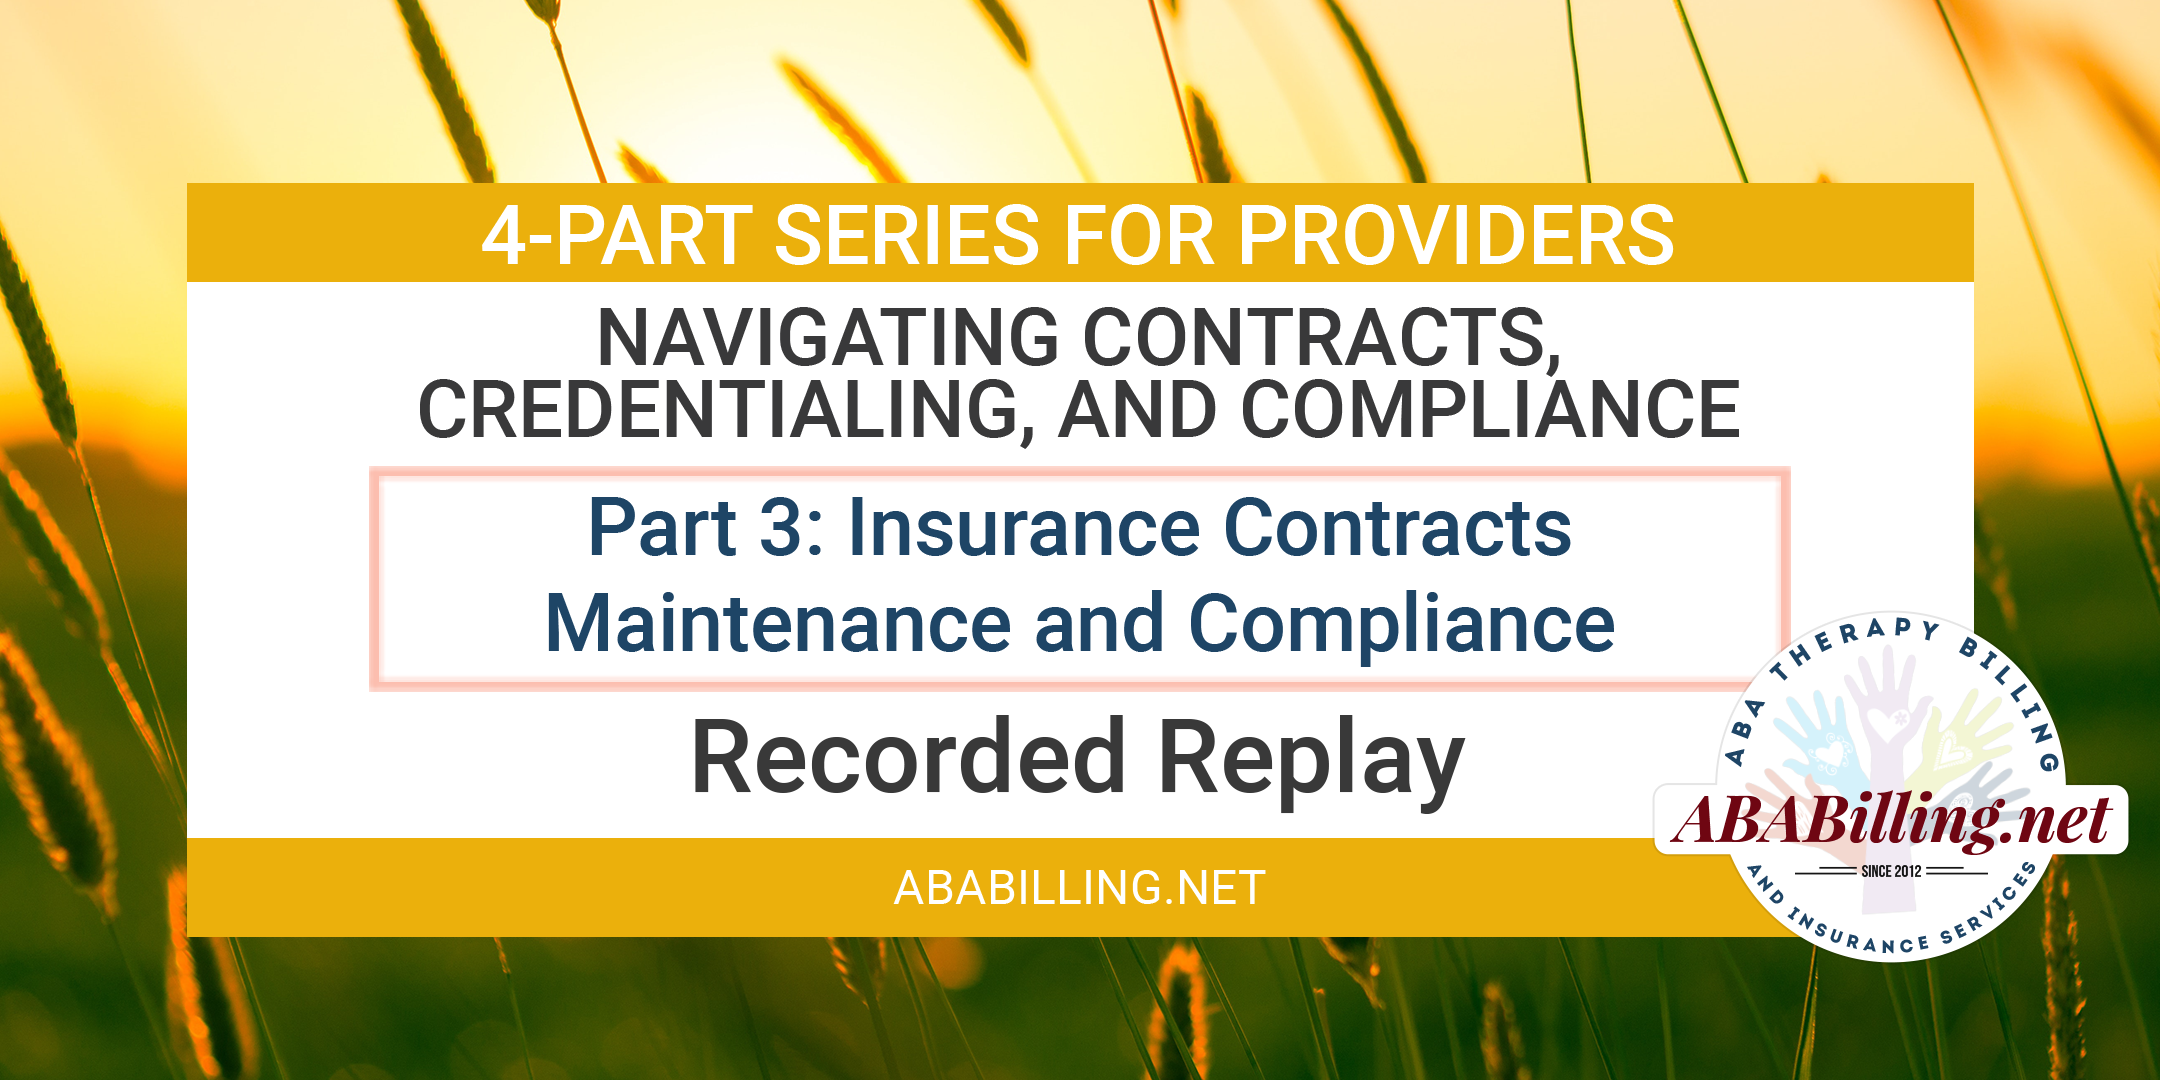 Webinar: Navigating Contracts, Credentialing, and Compliance Part 3: Insurance Contracts: Maintenance and Compliance